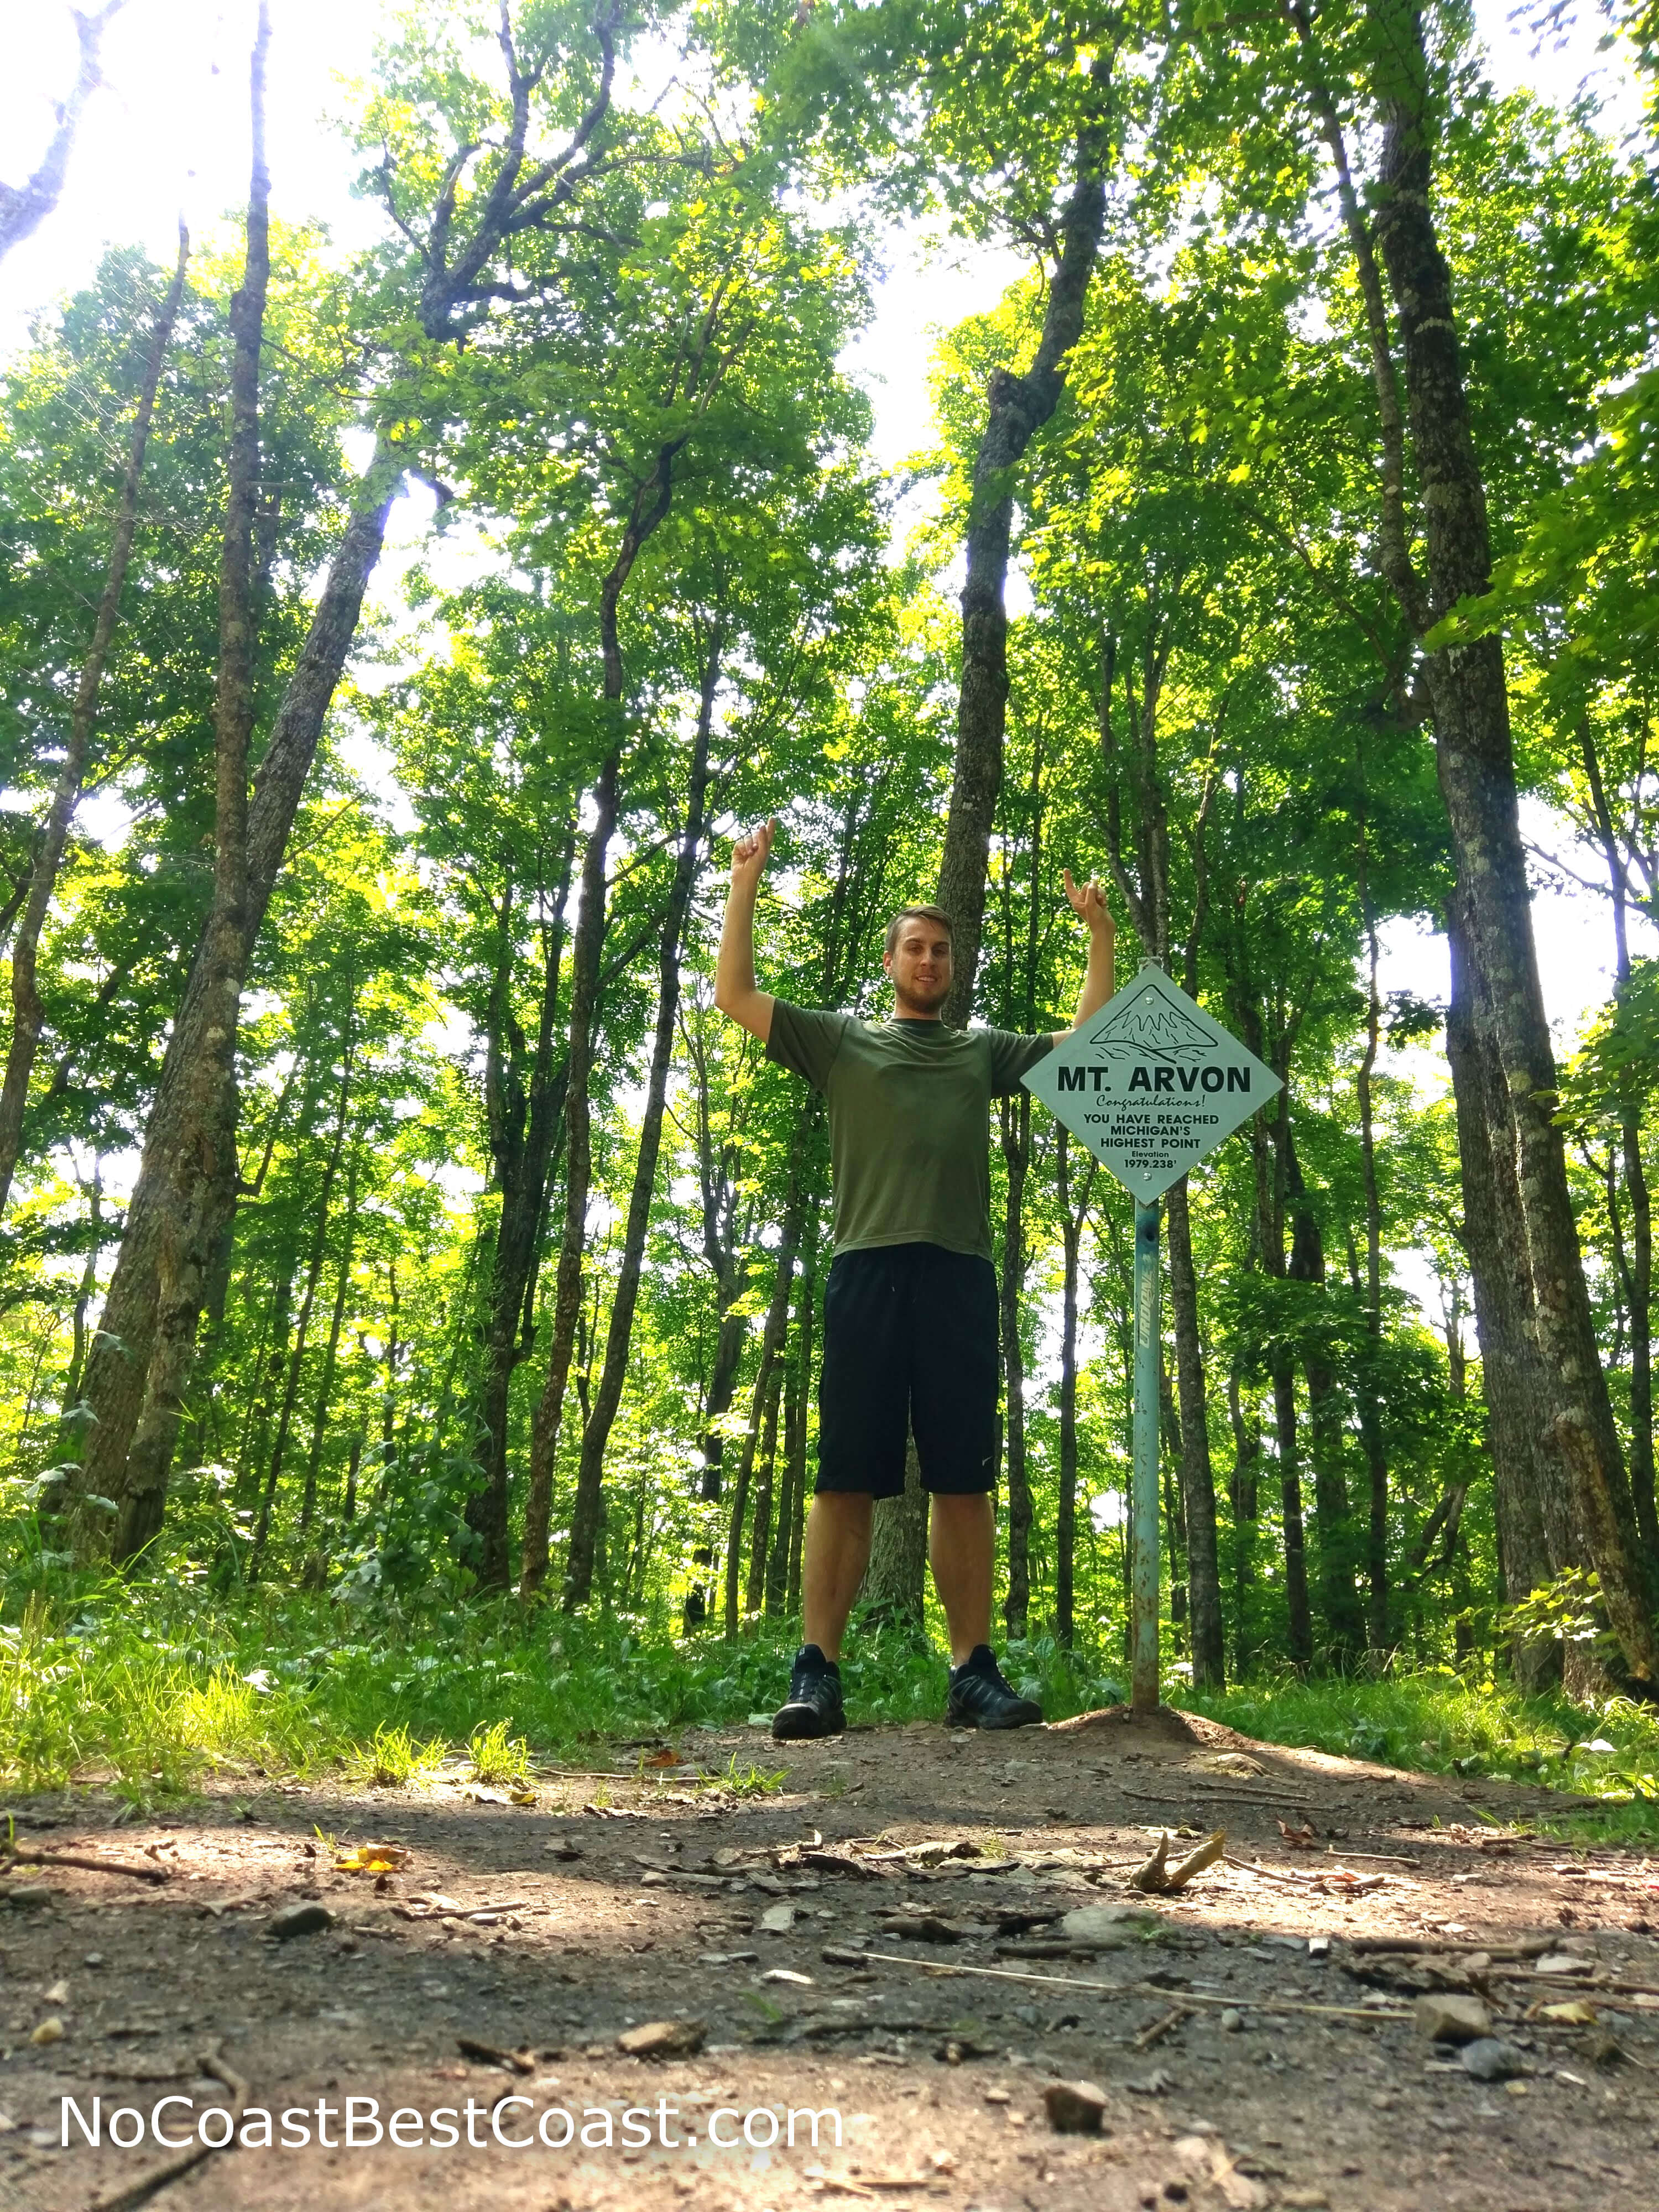 This sign marks the highest point in all of Michigan!